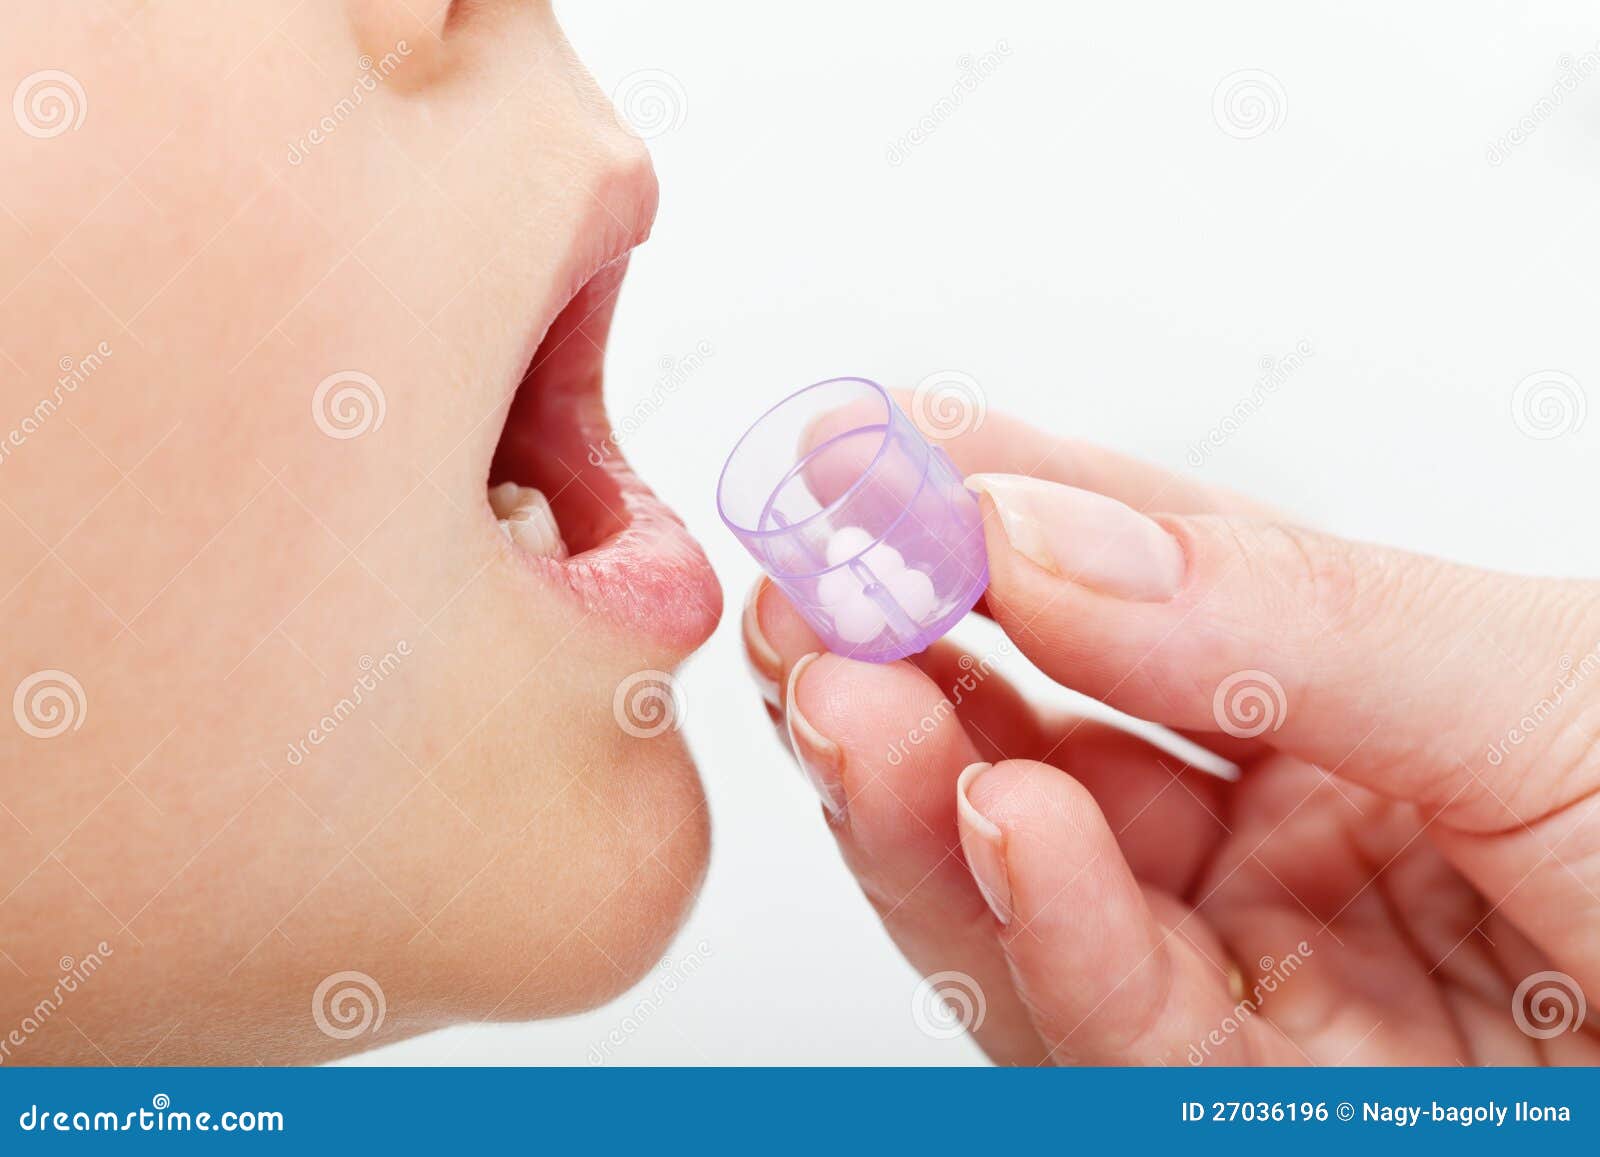 child receiving homeopathic medication granules